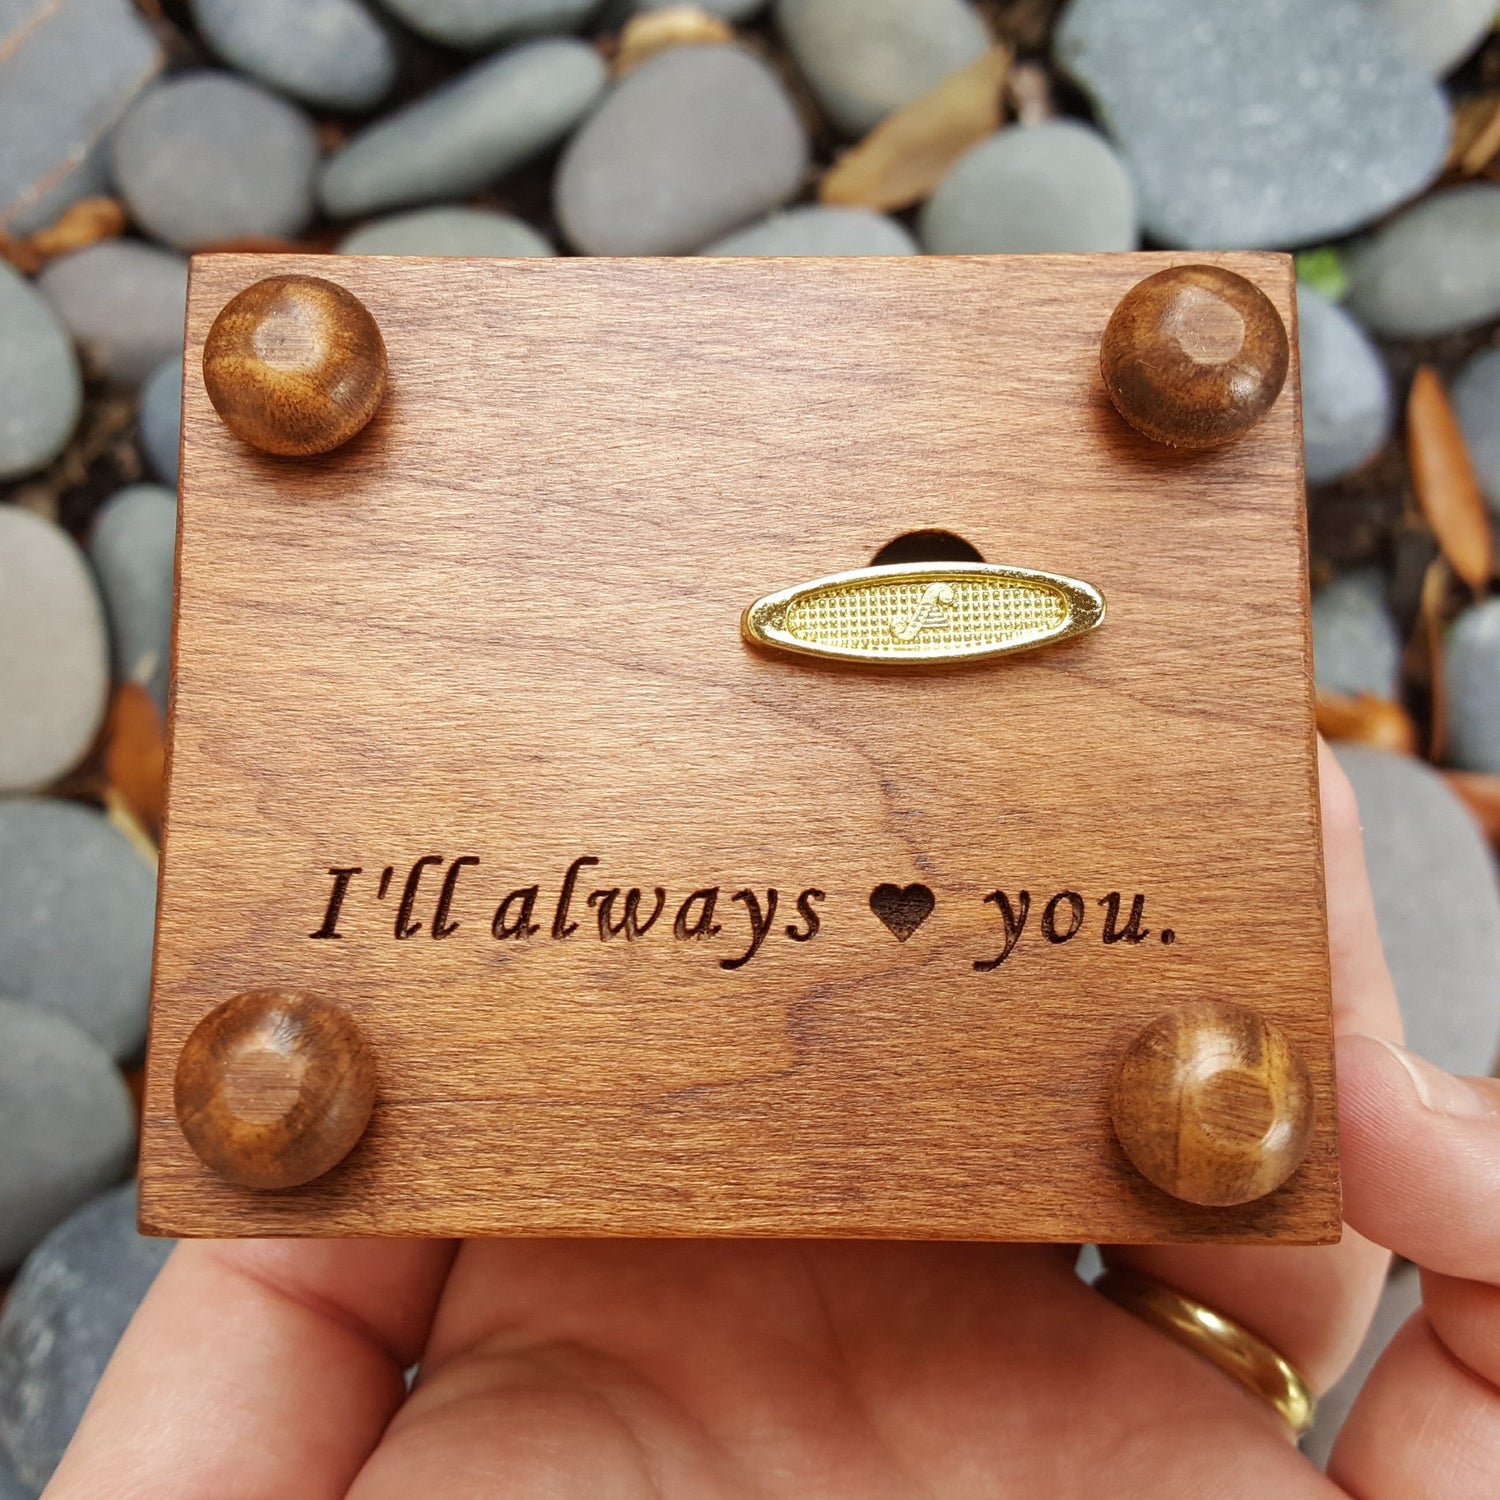 I'll always love you engraved on the bottom side of music box